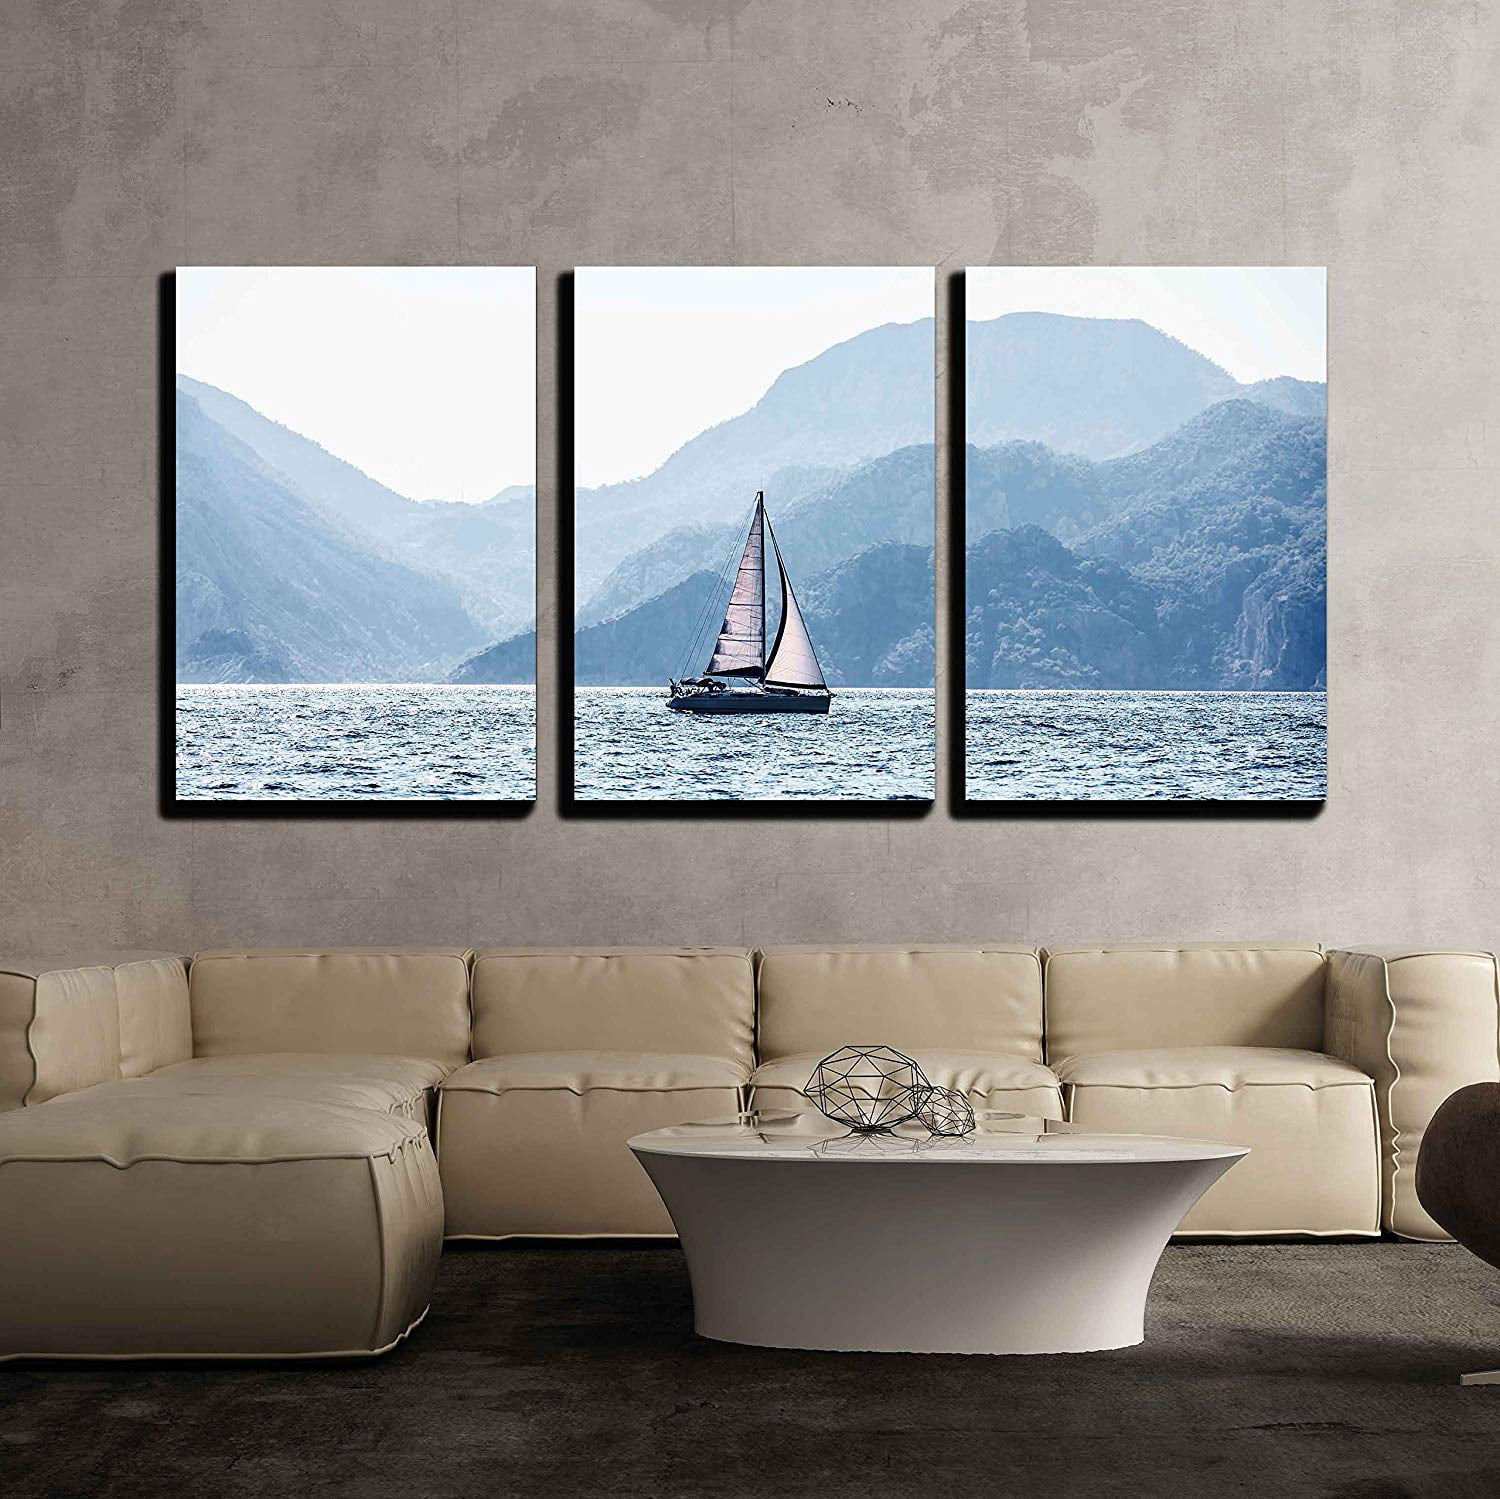 WALL ART UK 4032 30 SHAPES yacht competition sails CANVAS PICTURE 